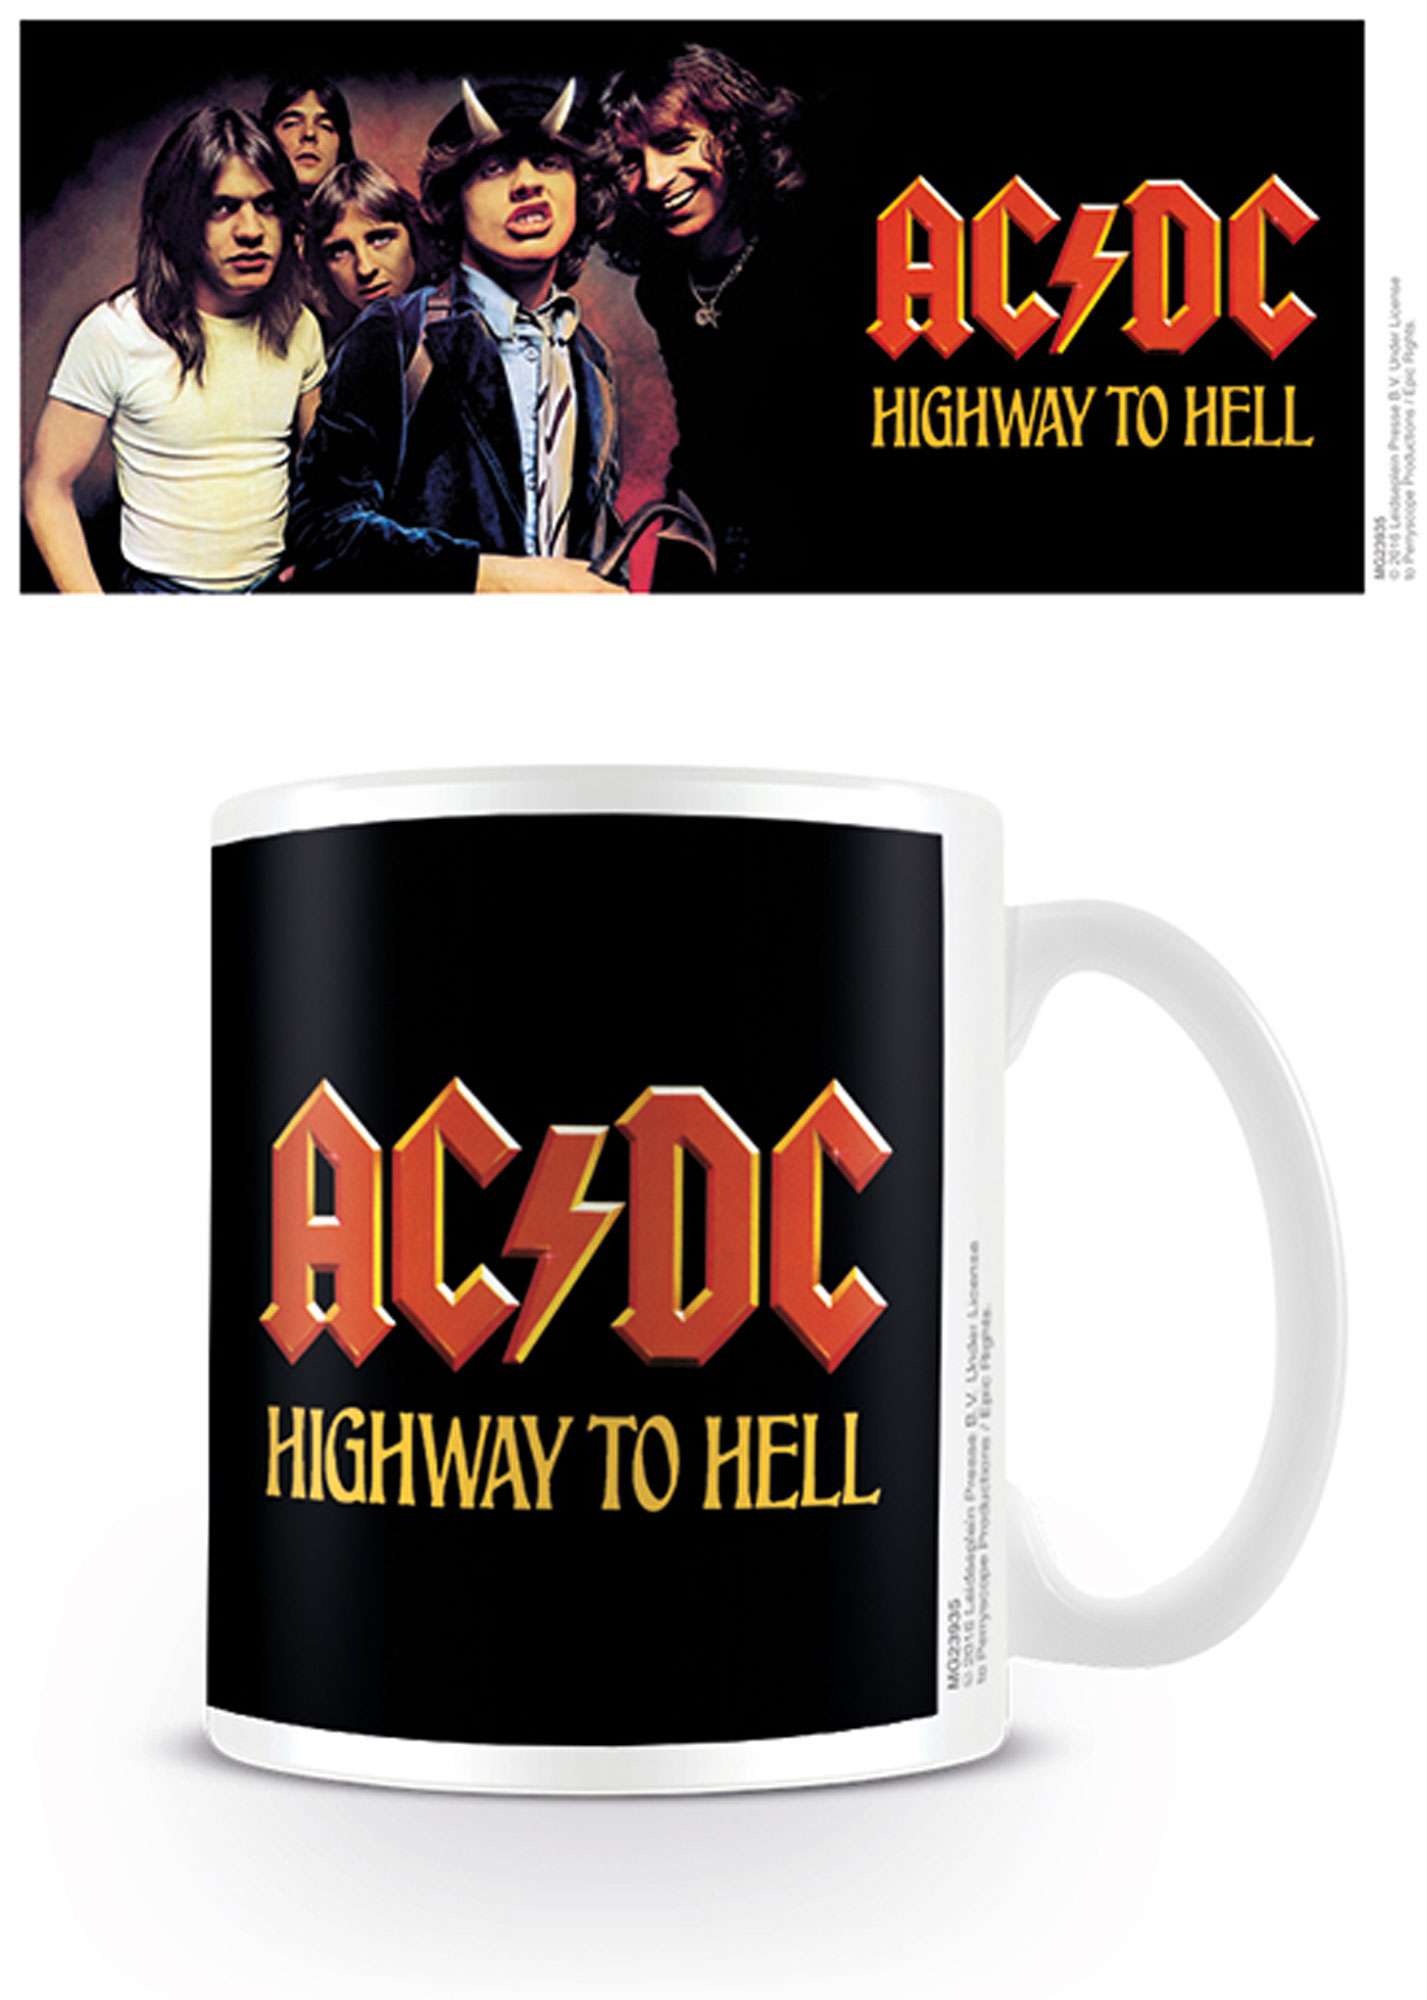 AC/DC - Highway to Hell